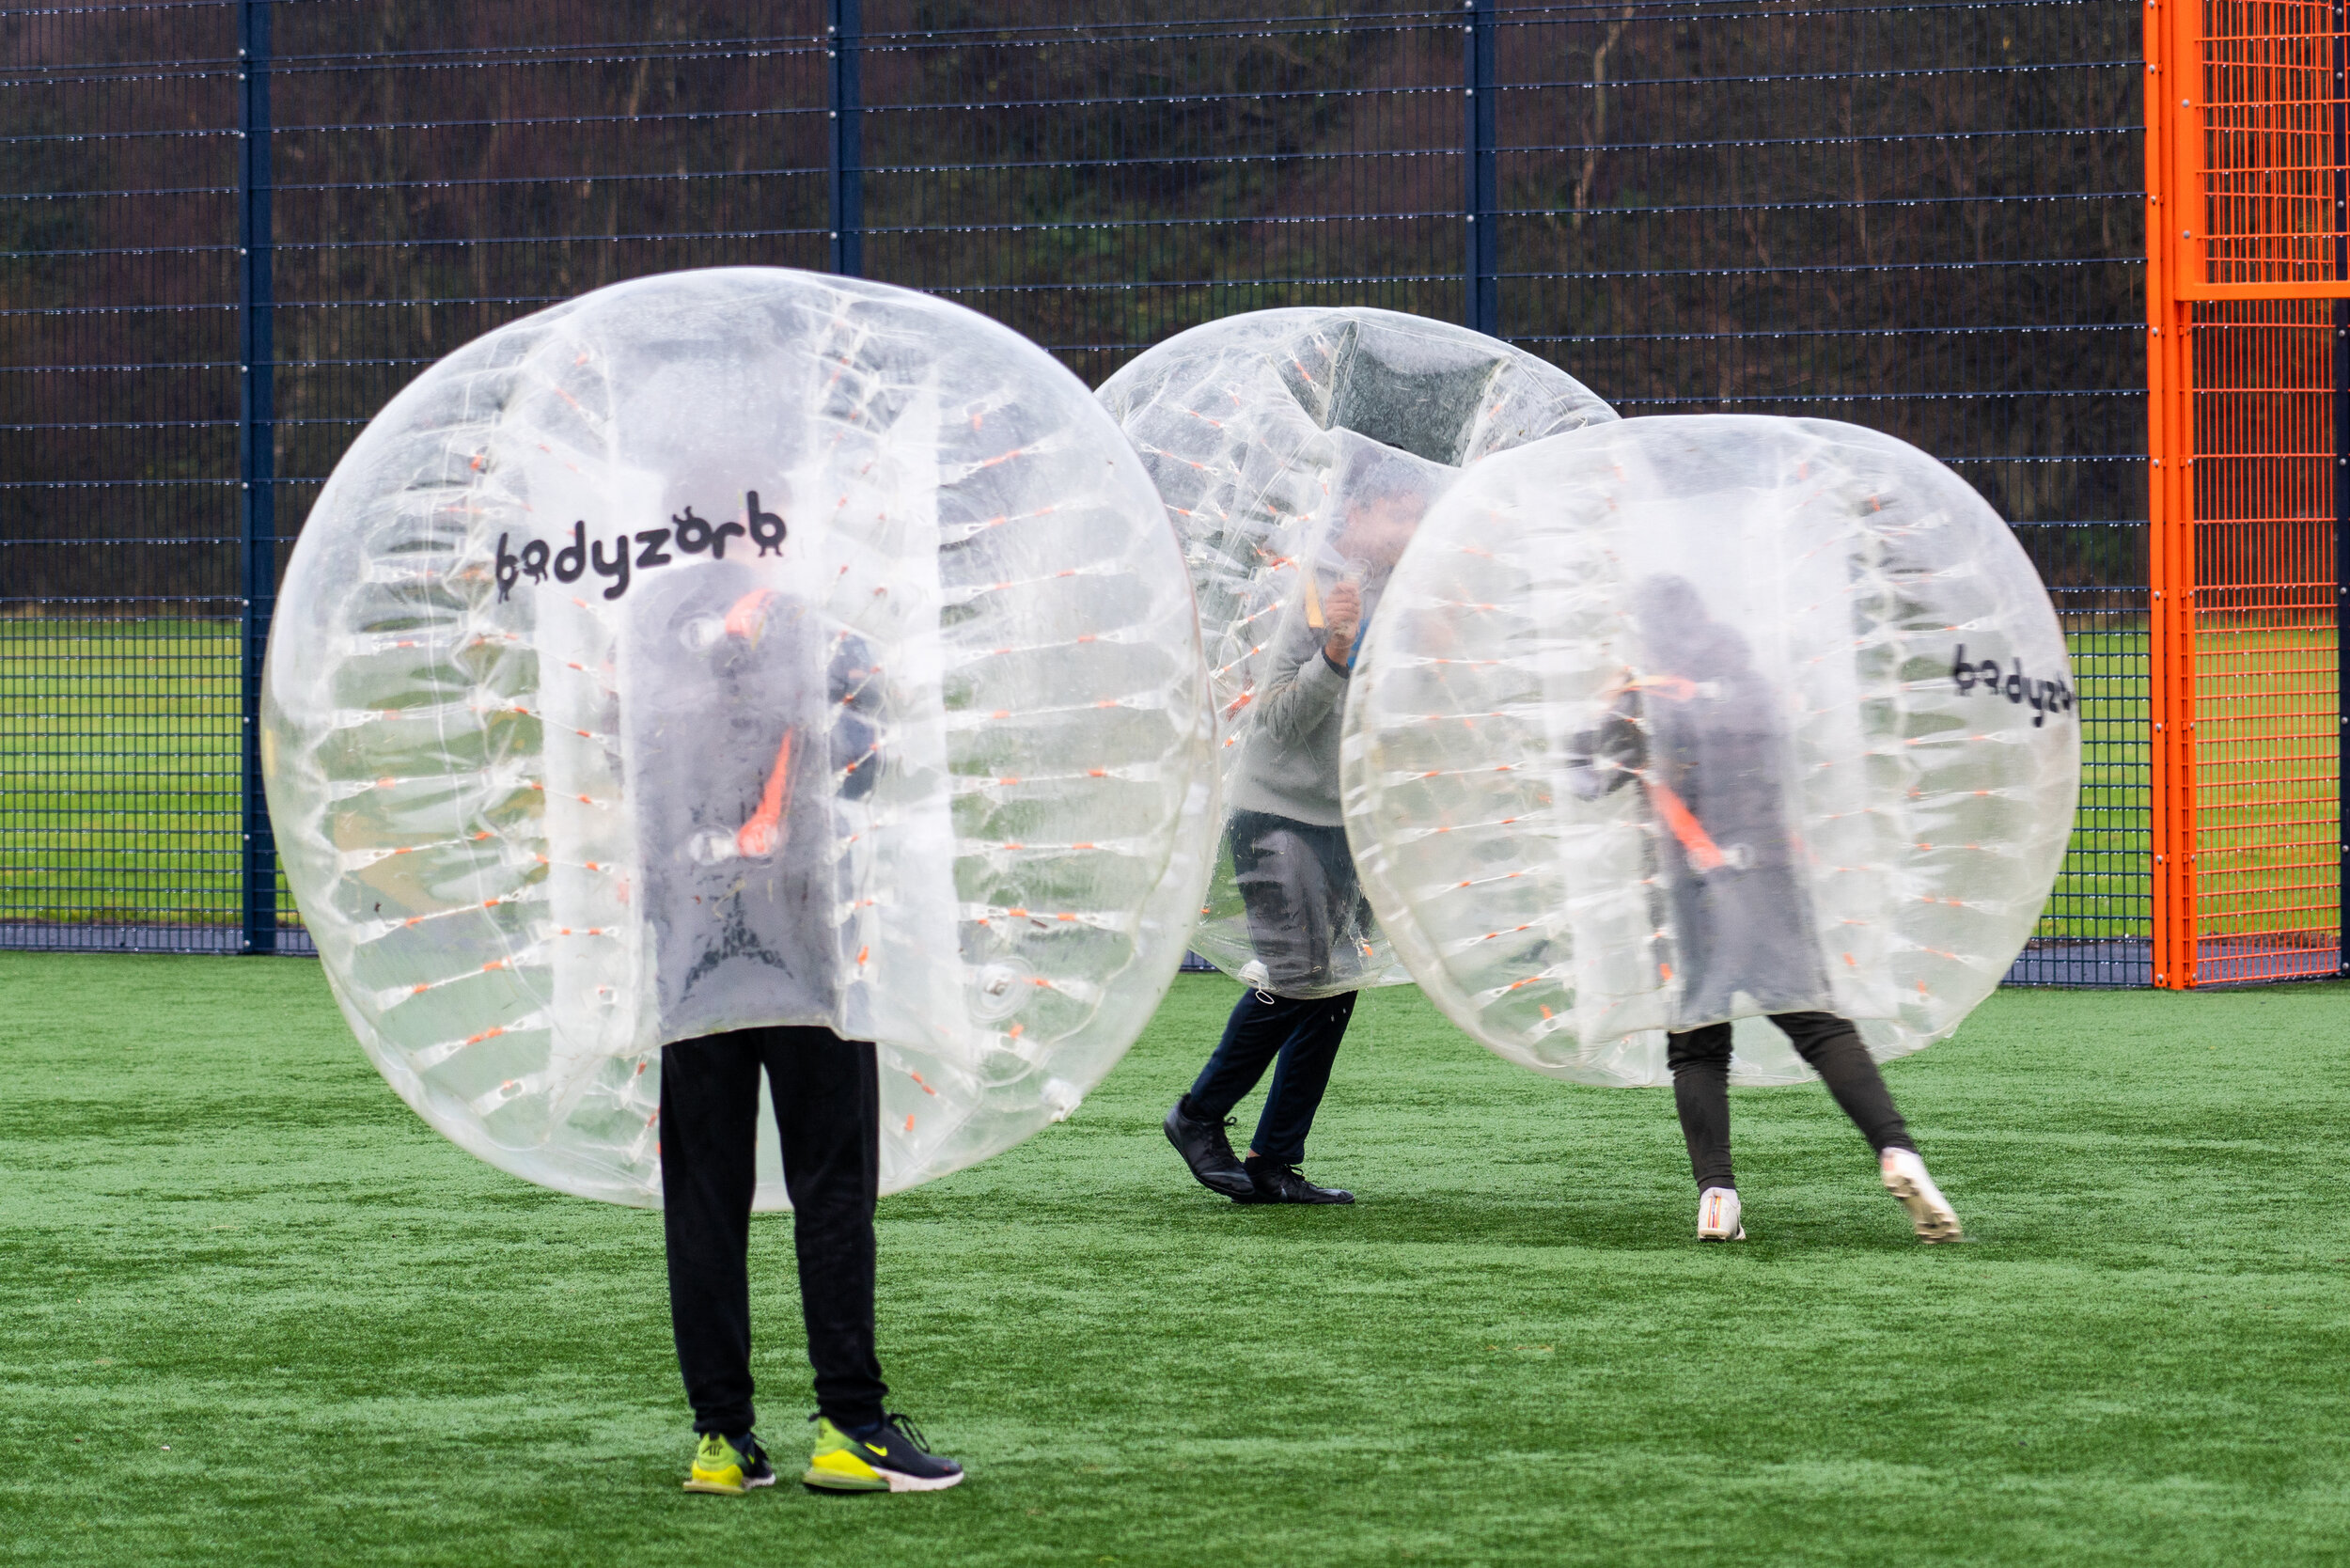 Zorbs. Credit: Andy Hall